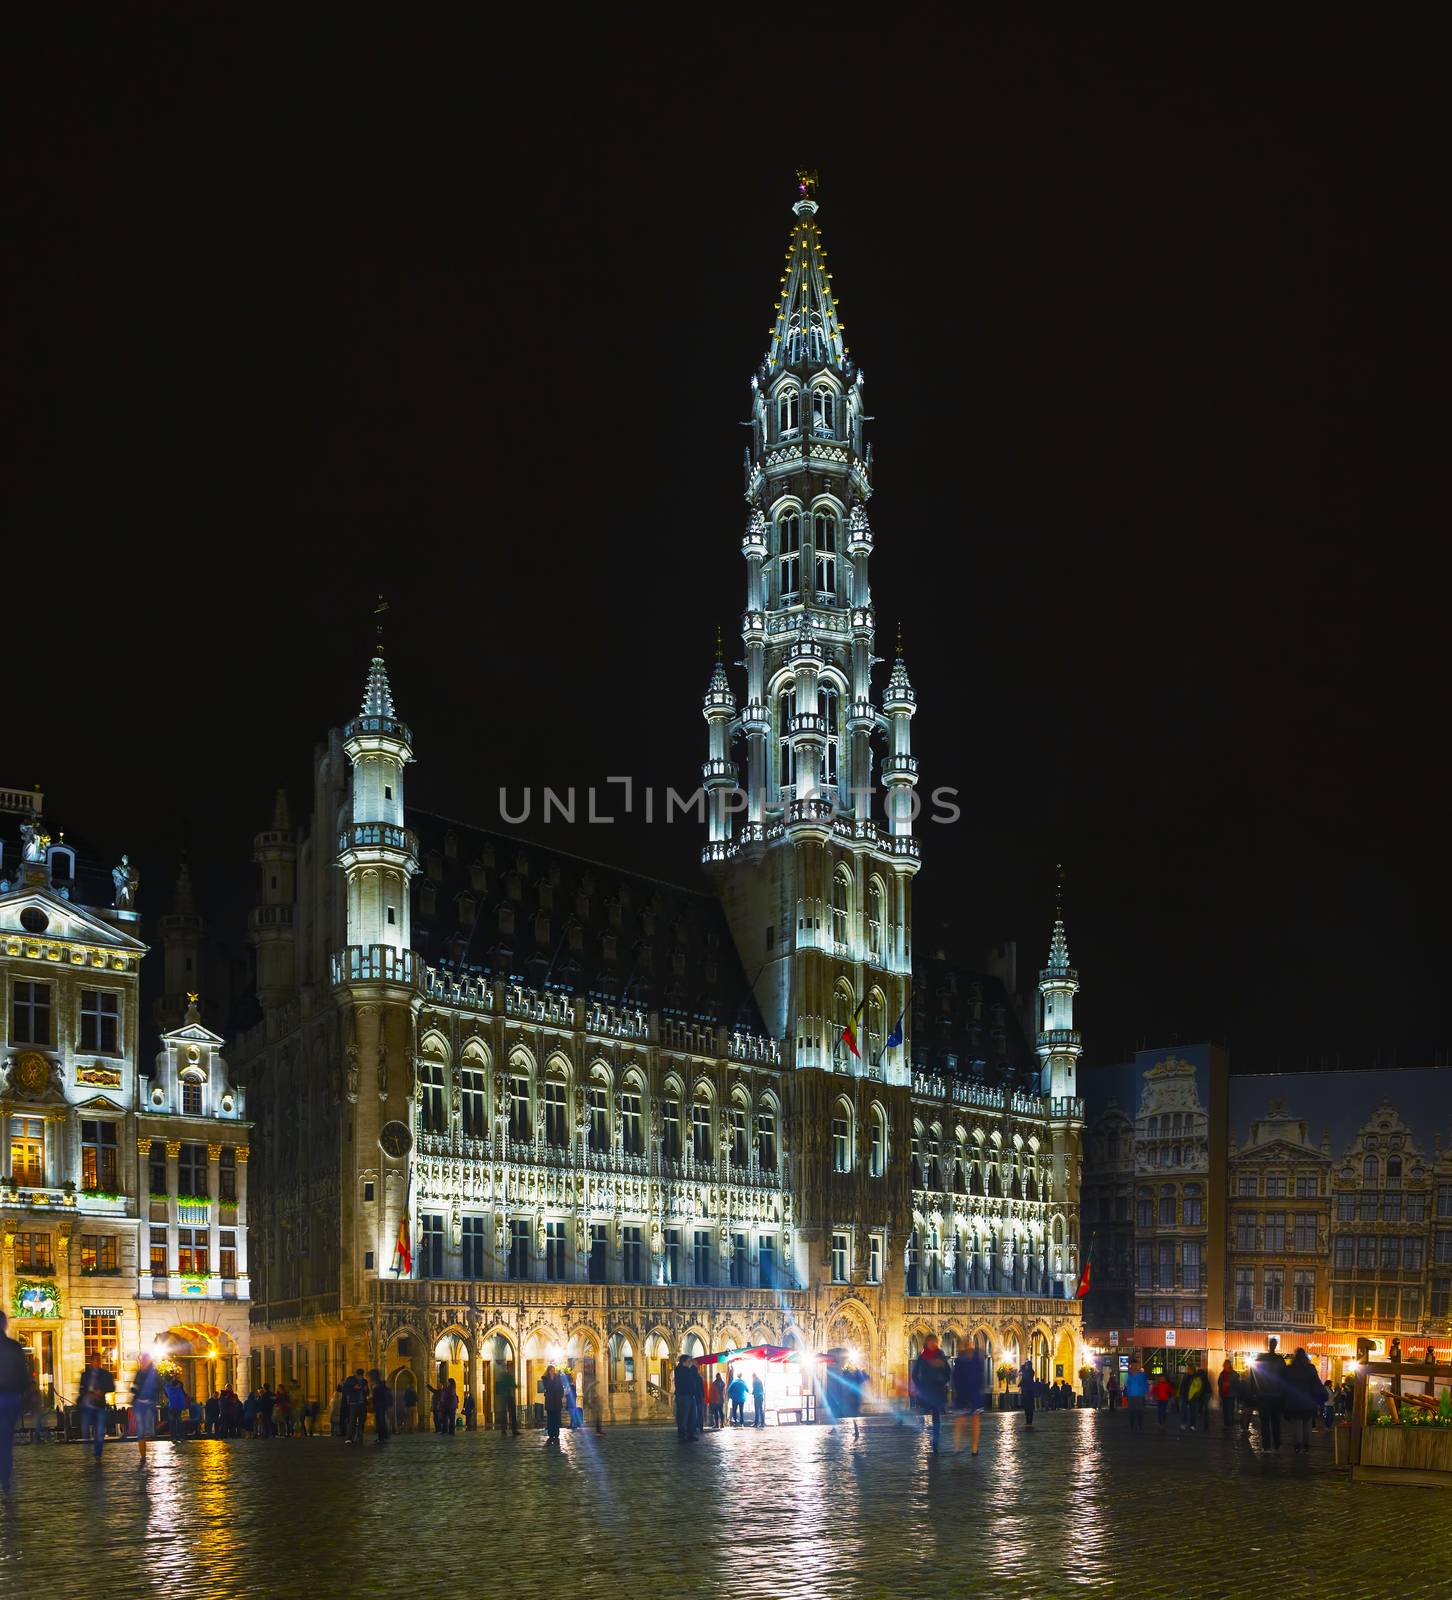 BRUSSELS - OCTOBER 6, 2014: Grand Place with the City Hall on October 6, 2014 in Brussels, Belgium. It's a Gothic building from the Middle Ages.